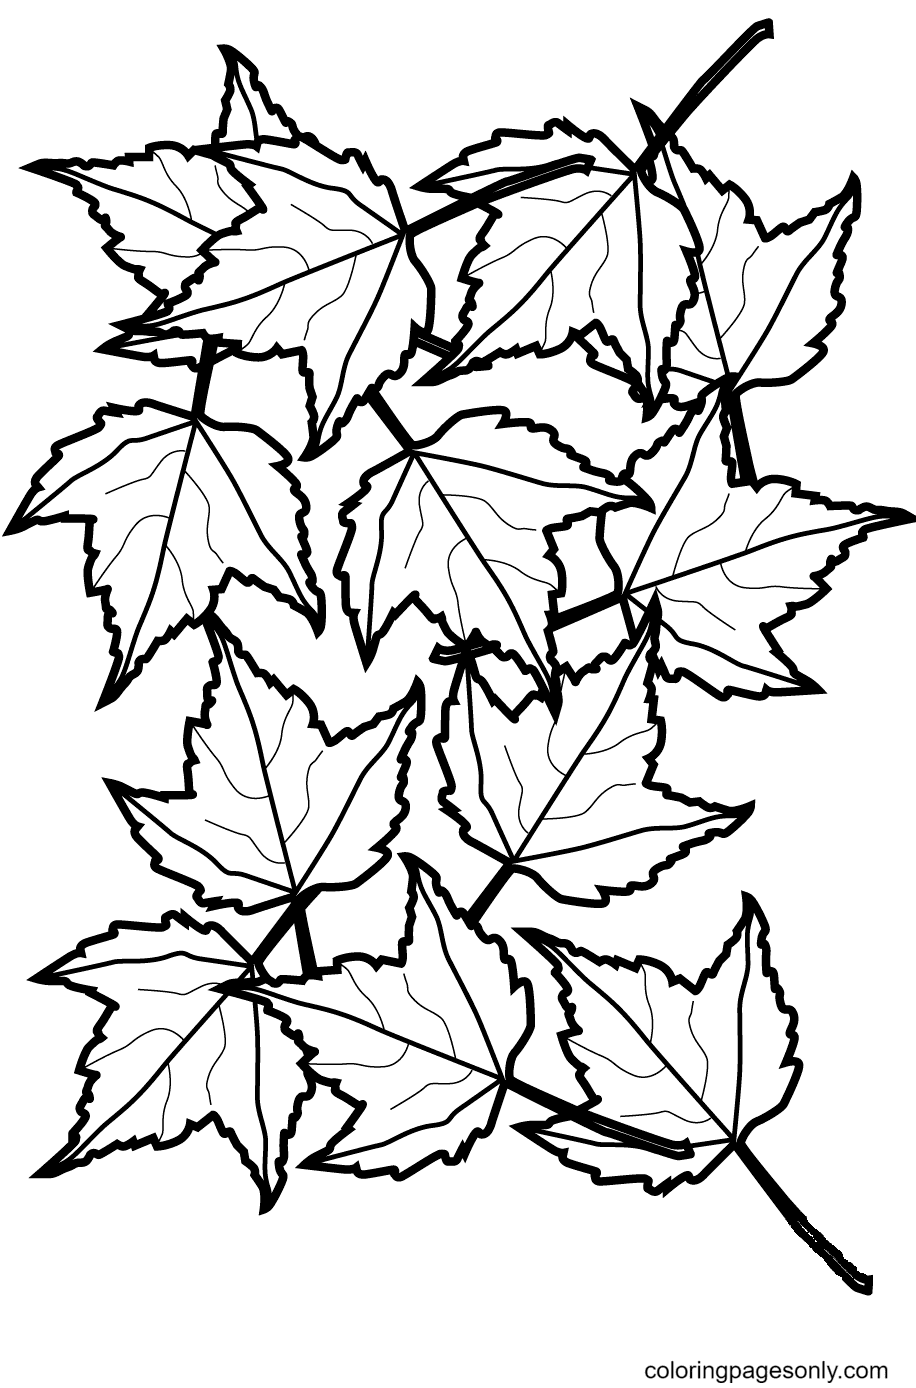 Autumn Maple Leaves Coloring Pages